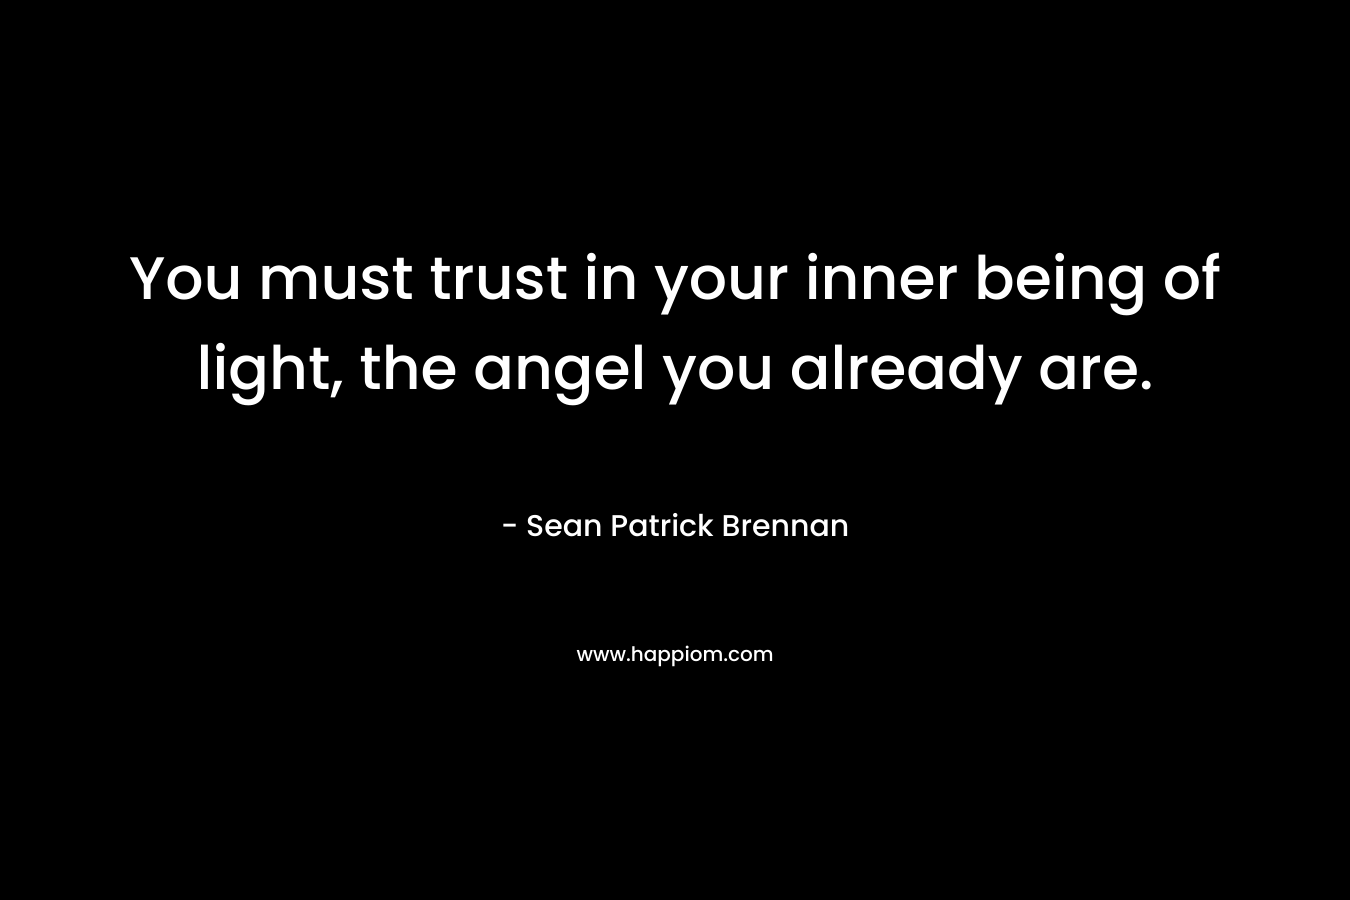 You must trust in your inner being of light, the angel you already are. – Sean Patrick Brennan